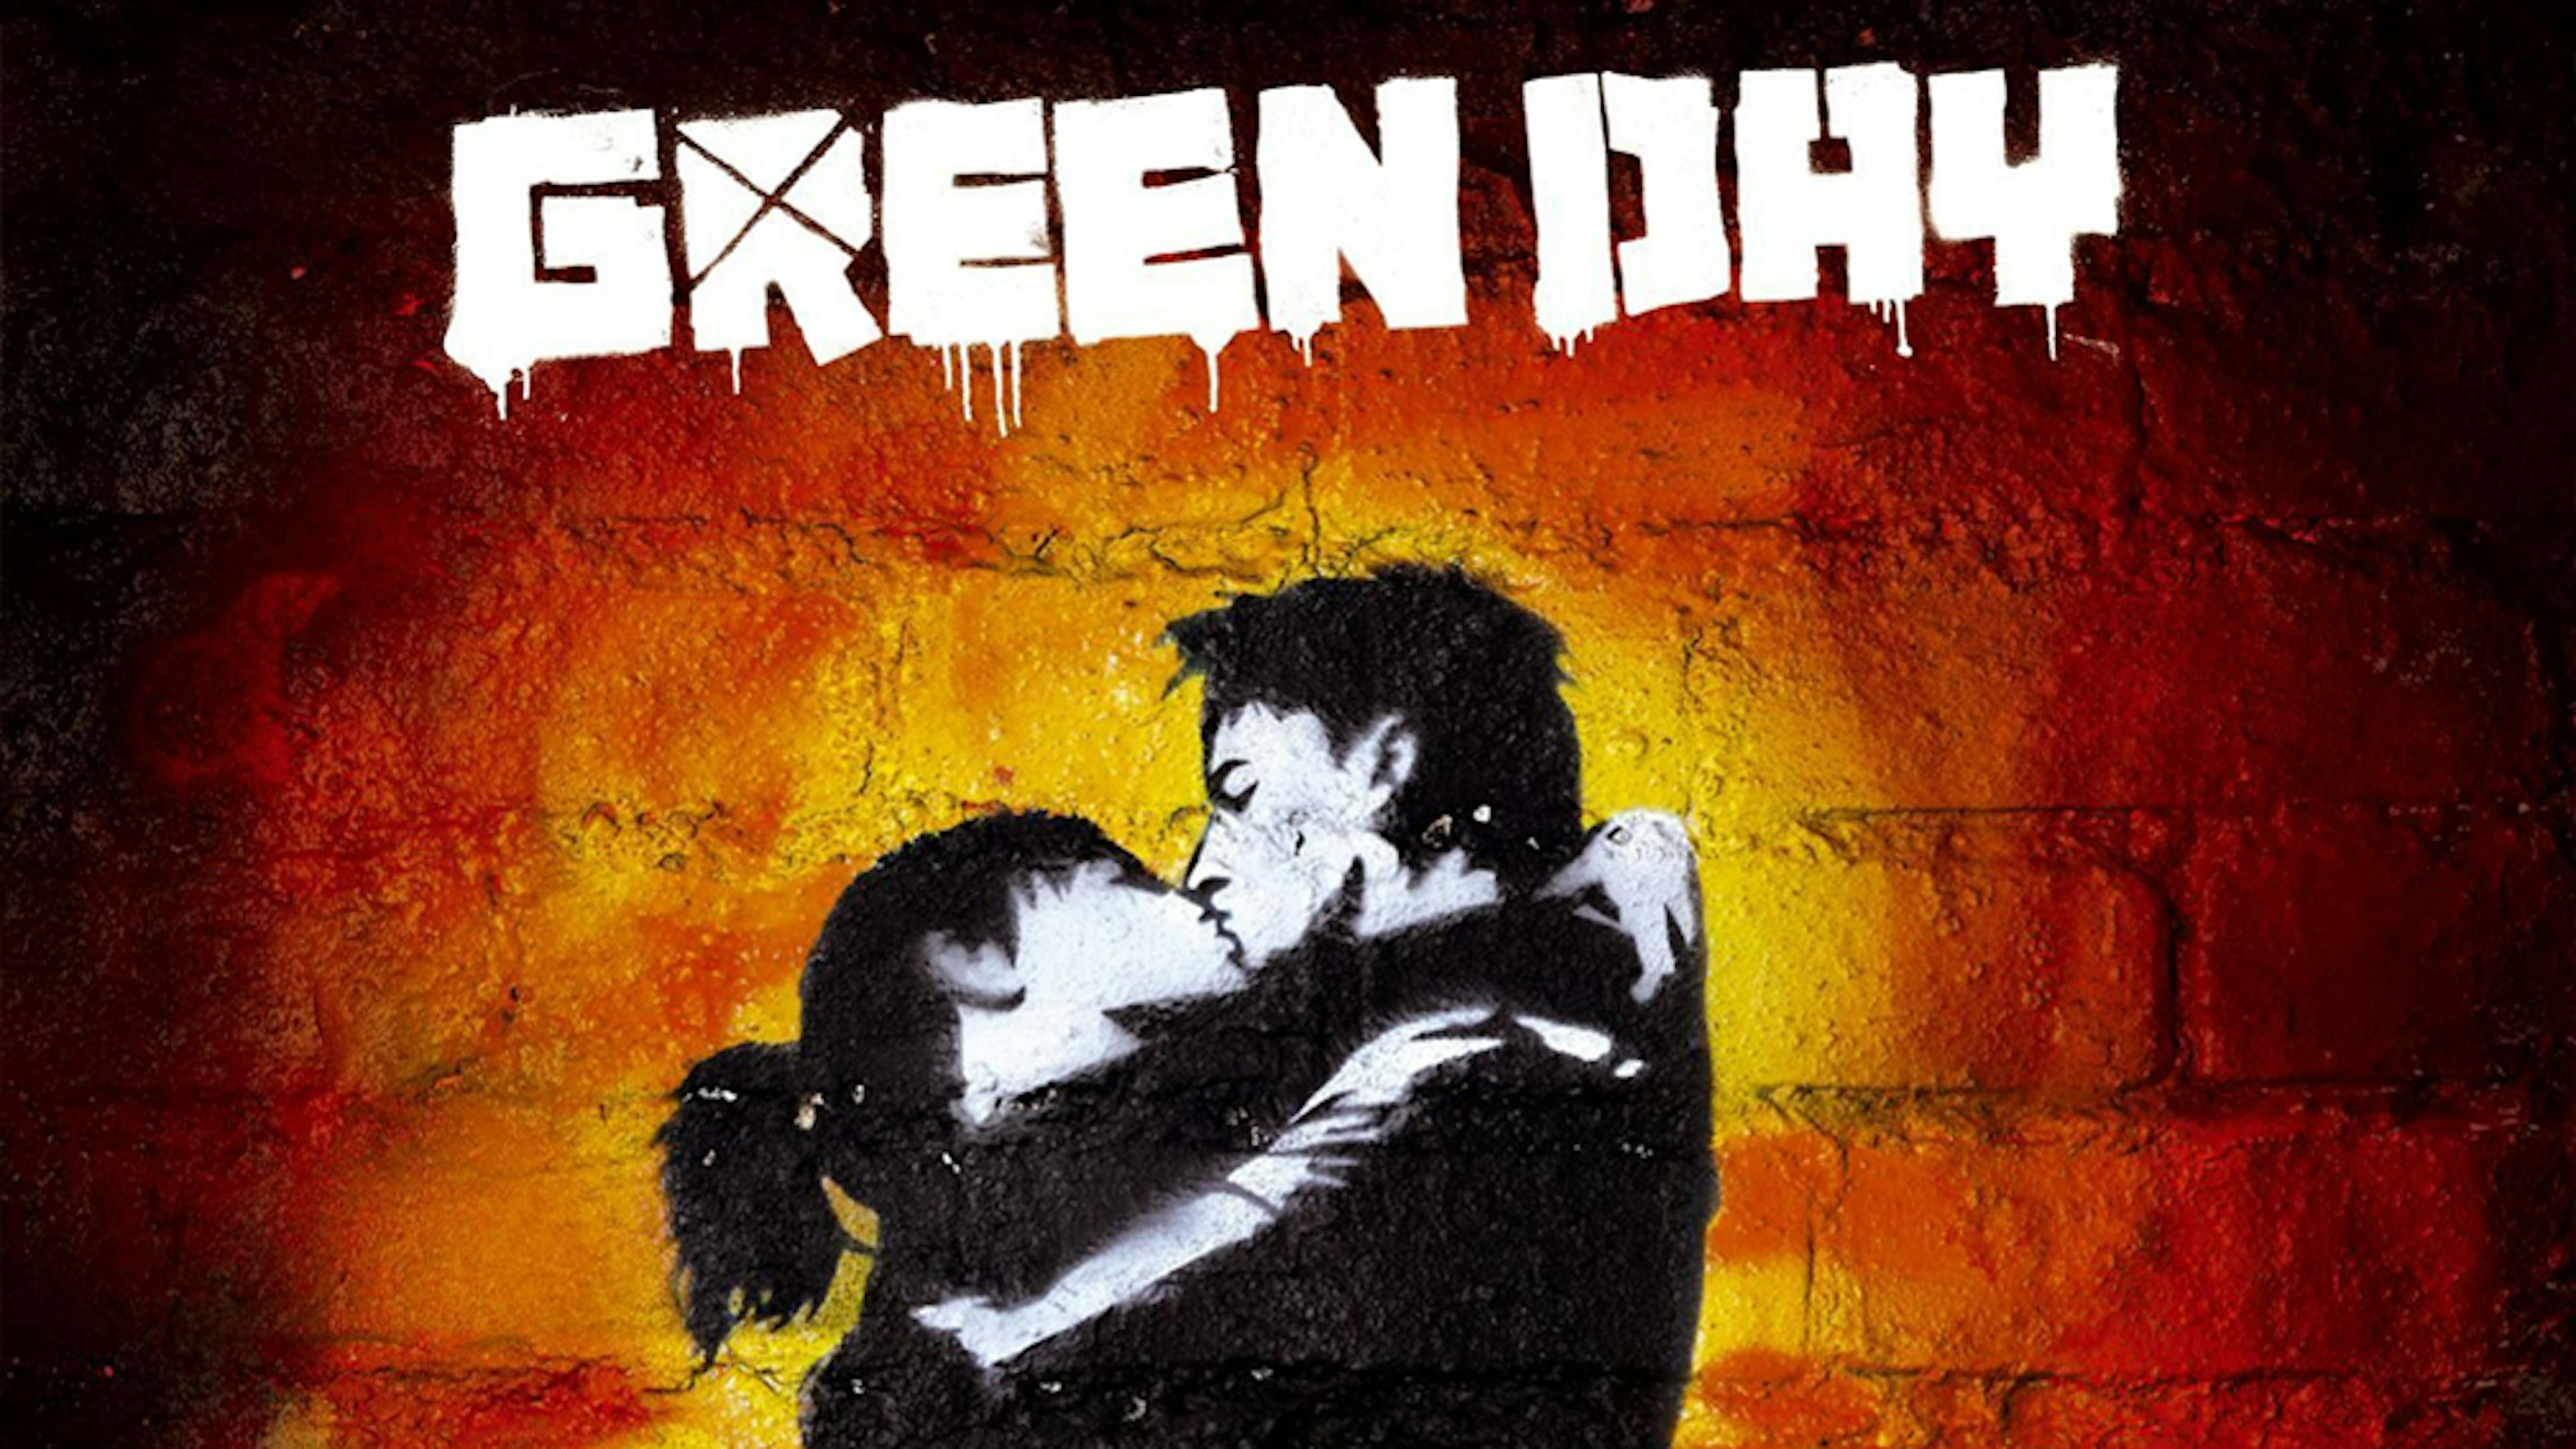 “We don’t want to cash in on our past success”: The story of Green Day’s 21st Century Breakdown